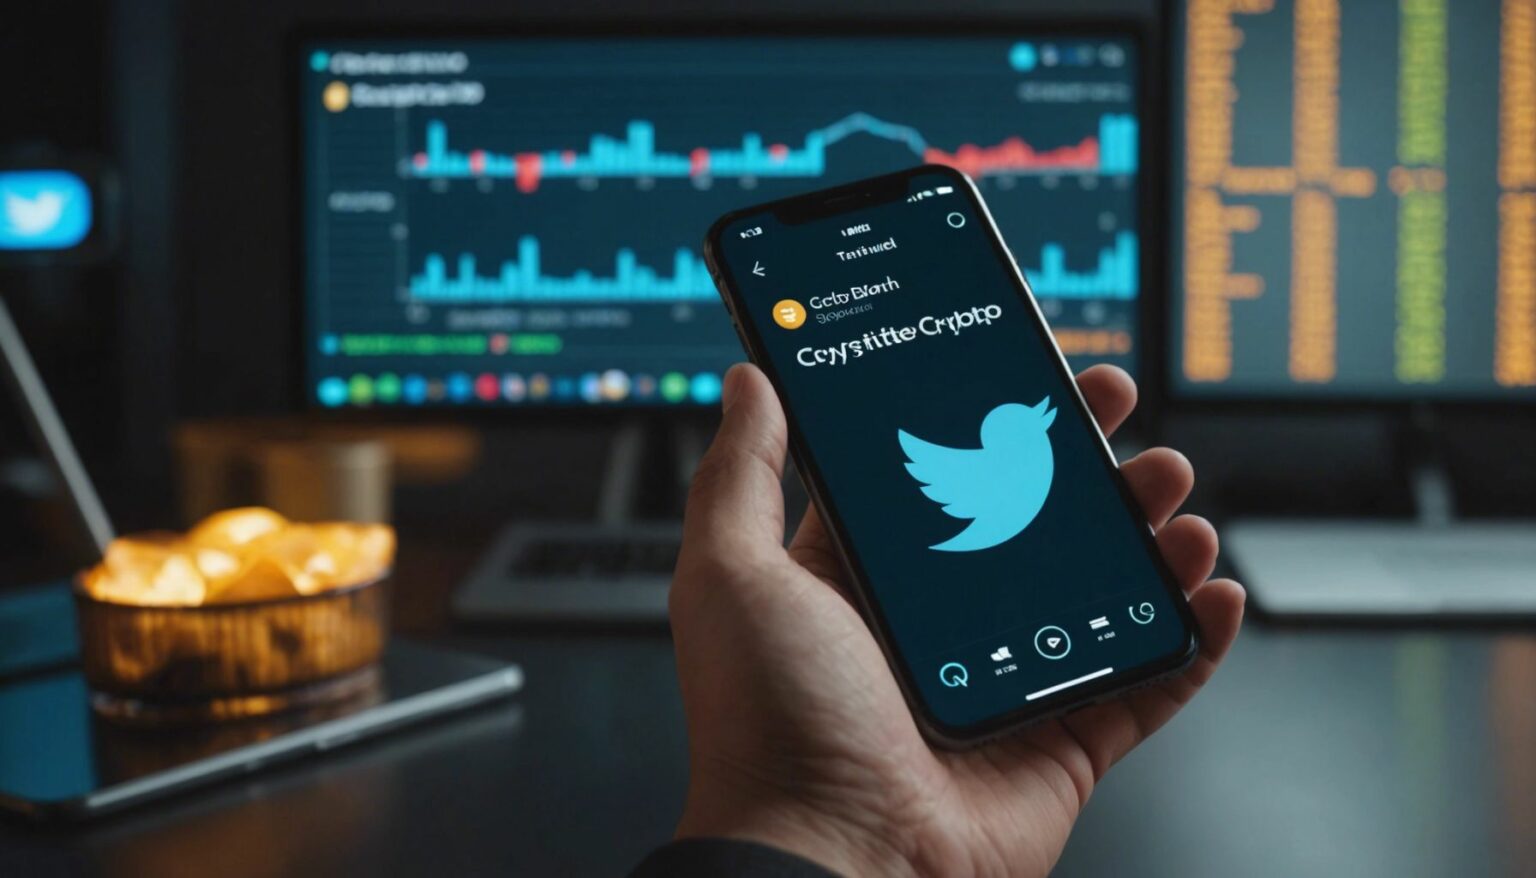 Smartphone showing Twitter app with crypto icons and graphs, representing the latest Twitter crypto news.